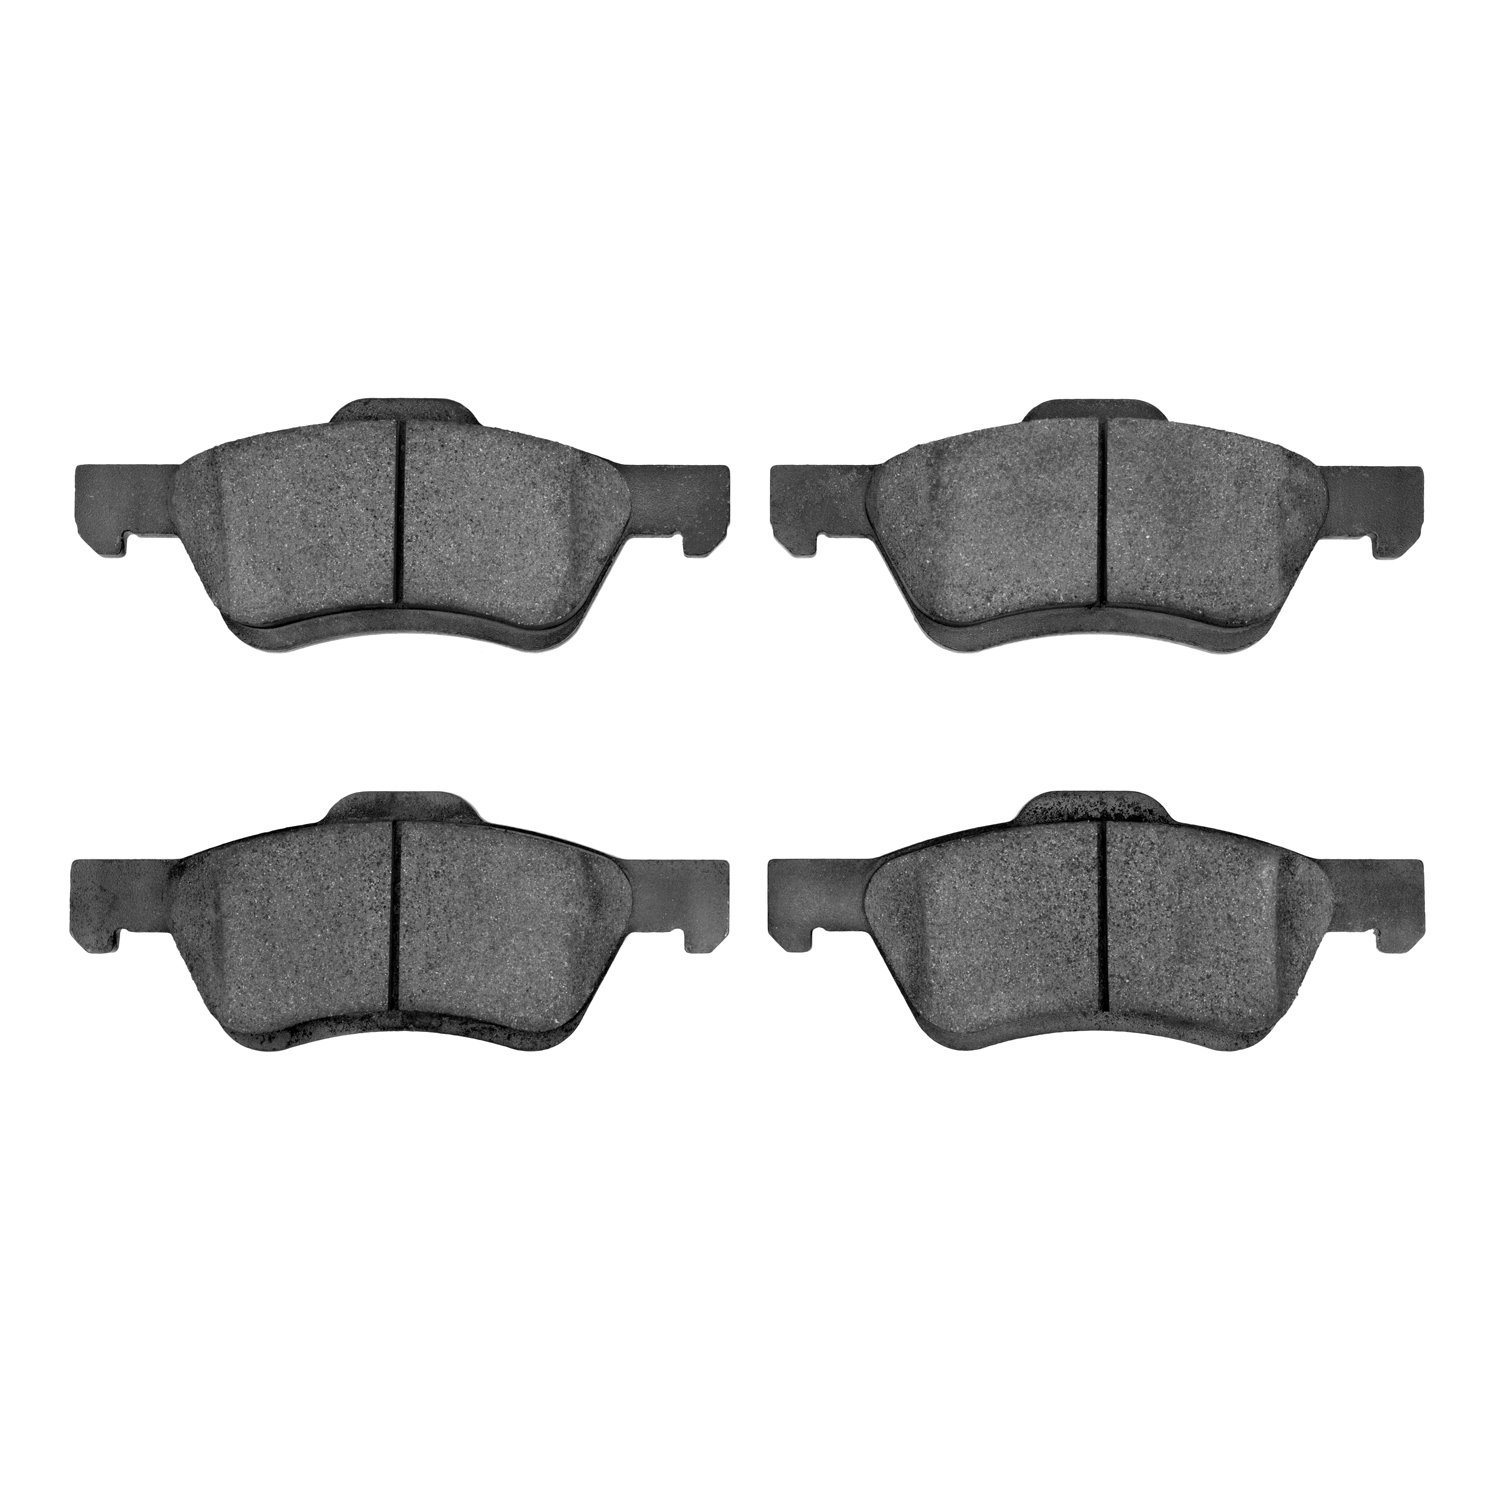 1310-1047-30 3000-Series Ceramic Brake Pads, 2009-2012 Ford/Lincoln/Mercury/Mazda, Position: Front